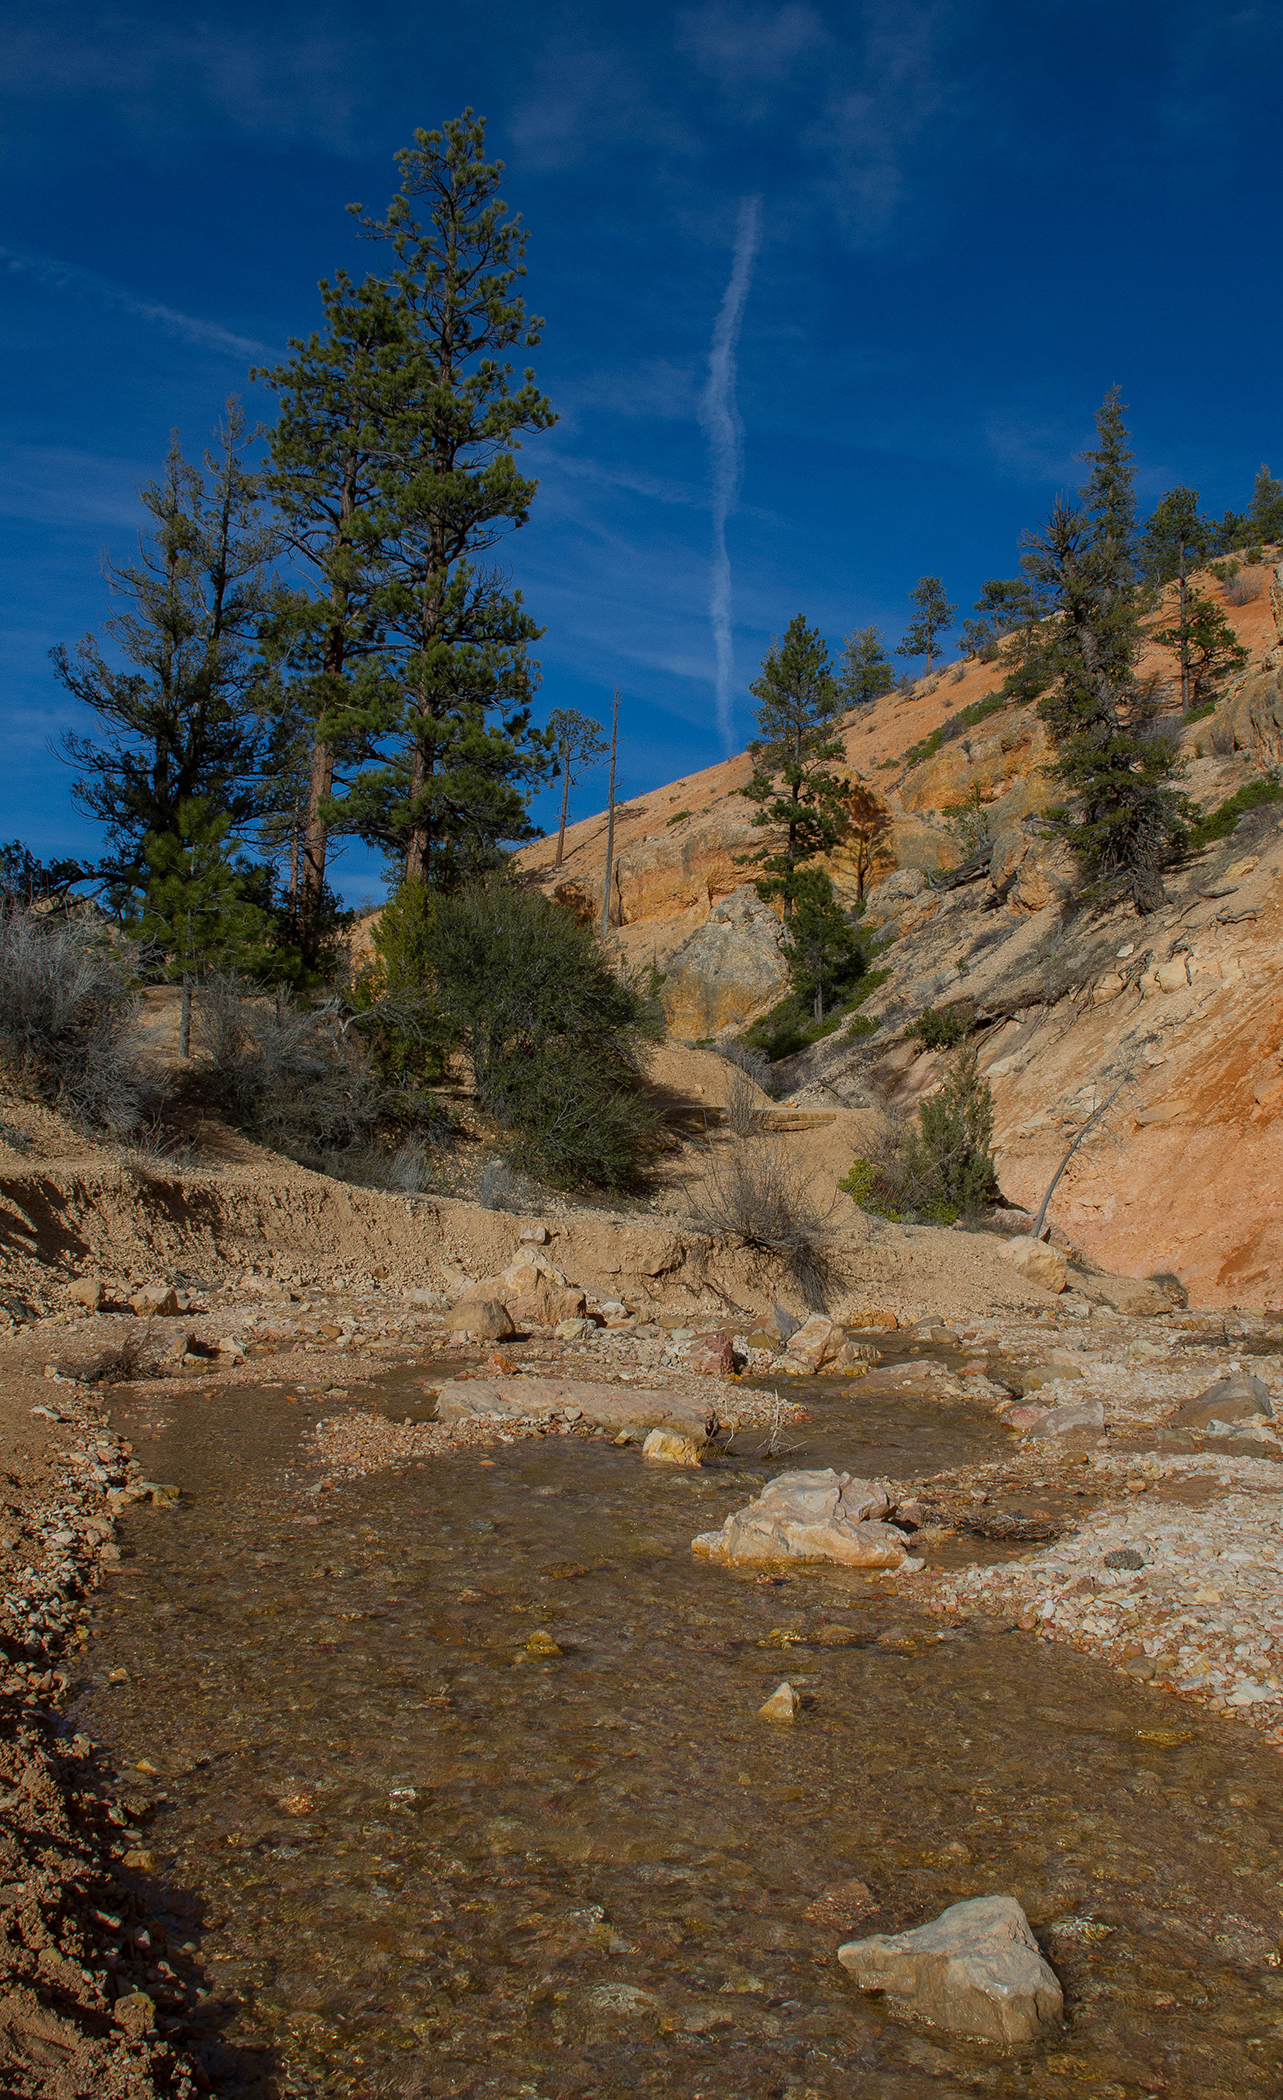 Stream flows next to red rock wall, with pine trees and blue sky.